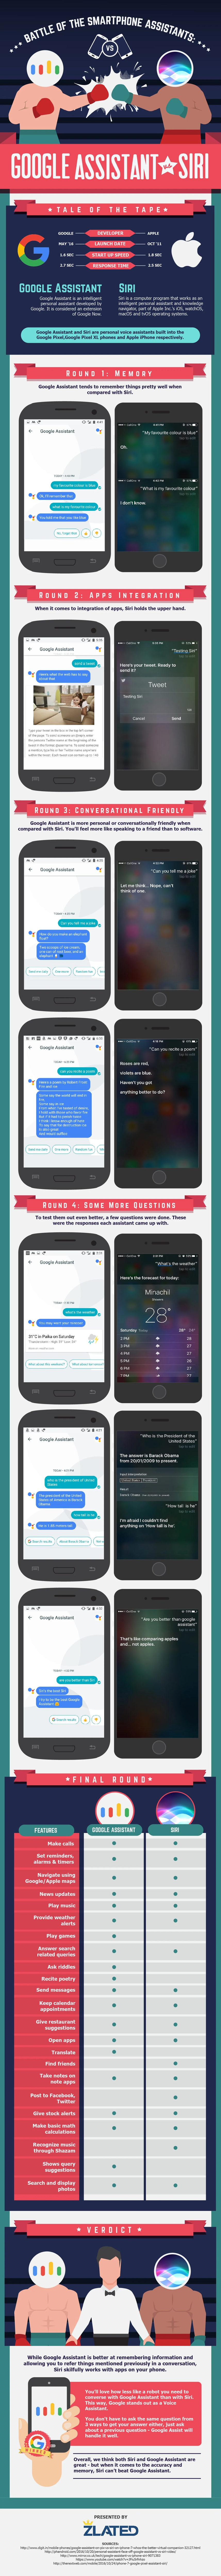 Google Assistant vs. Siri: Which is the Best Smartphone AI? - #infographic